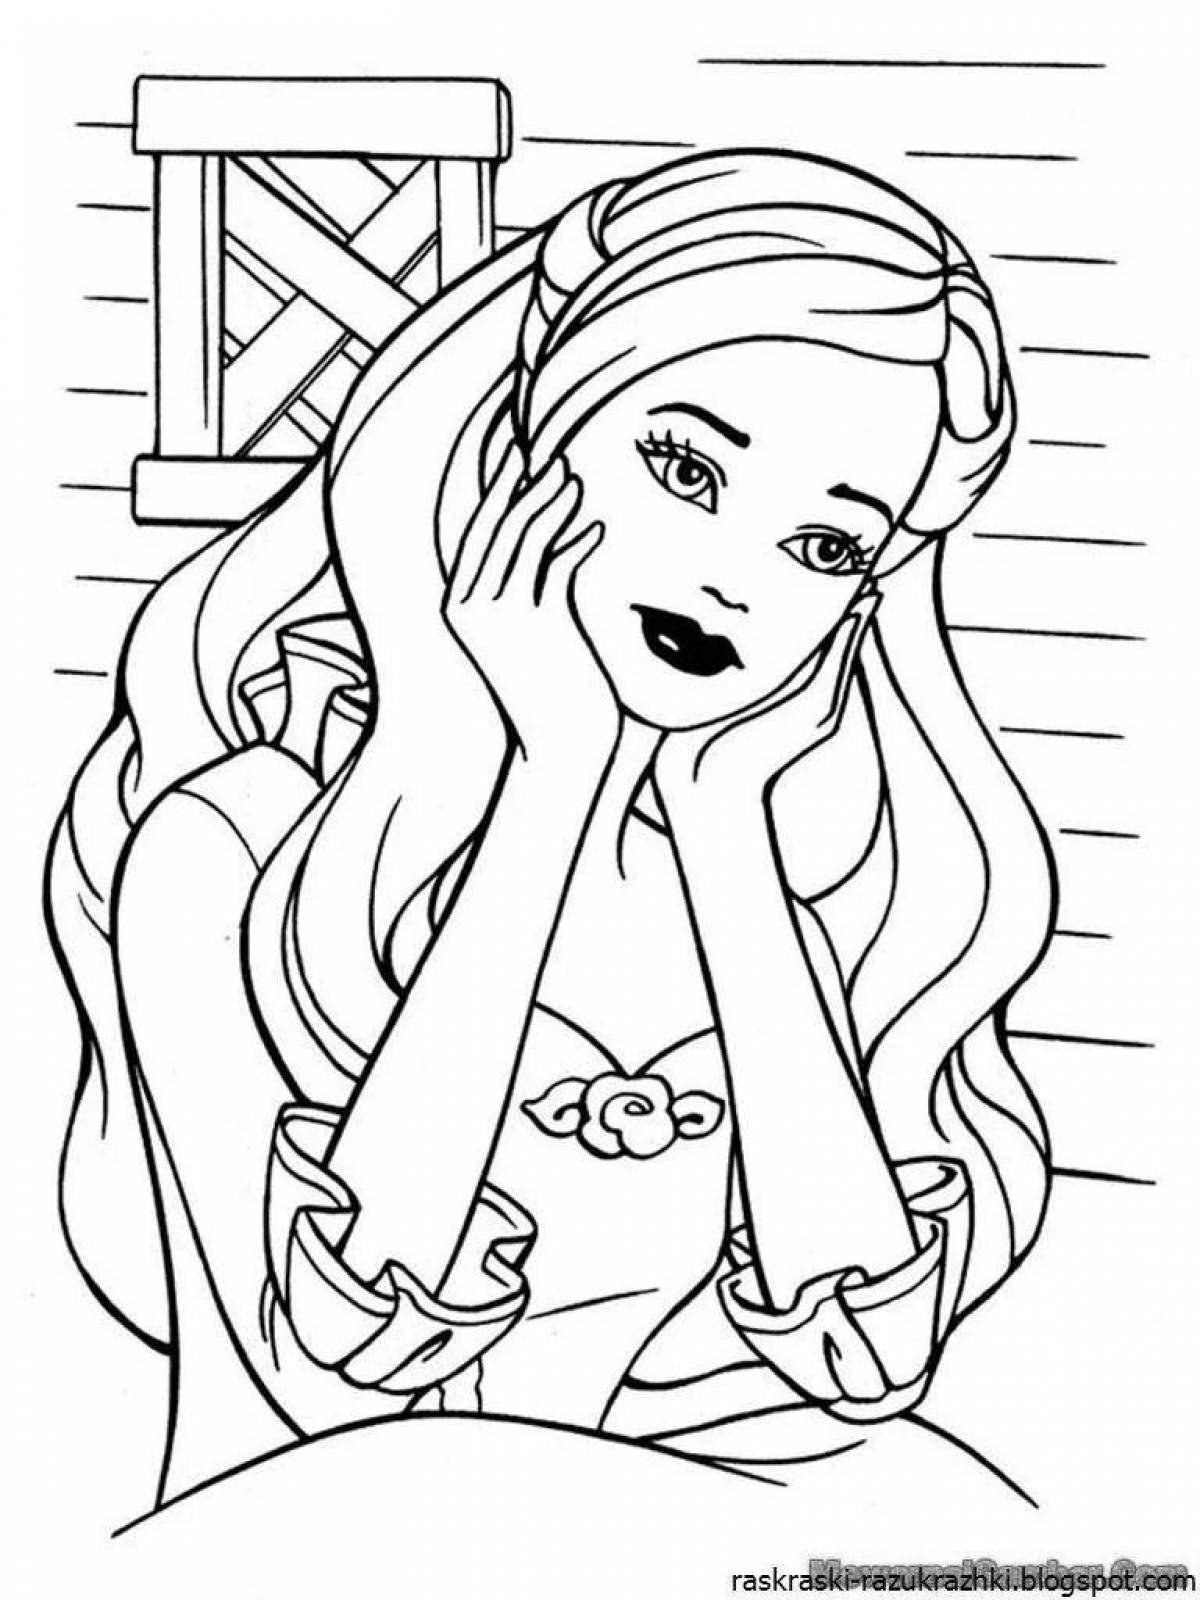 Colorful fun coloring book for girls 14-15 years old